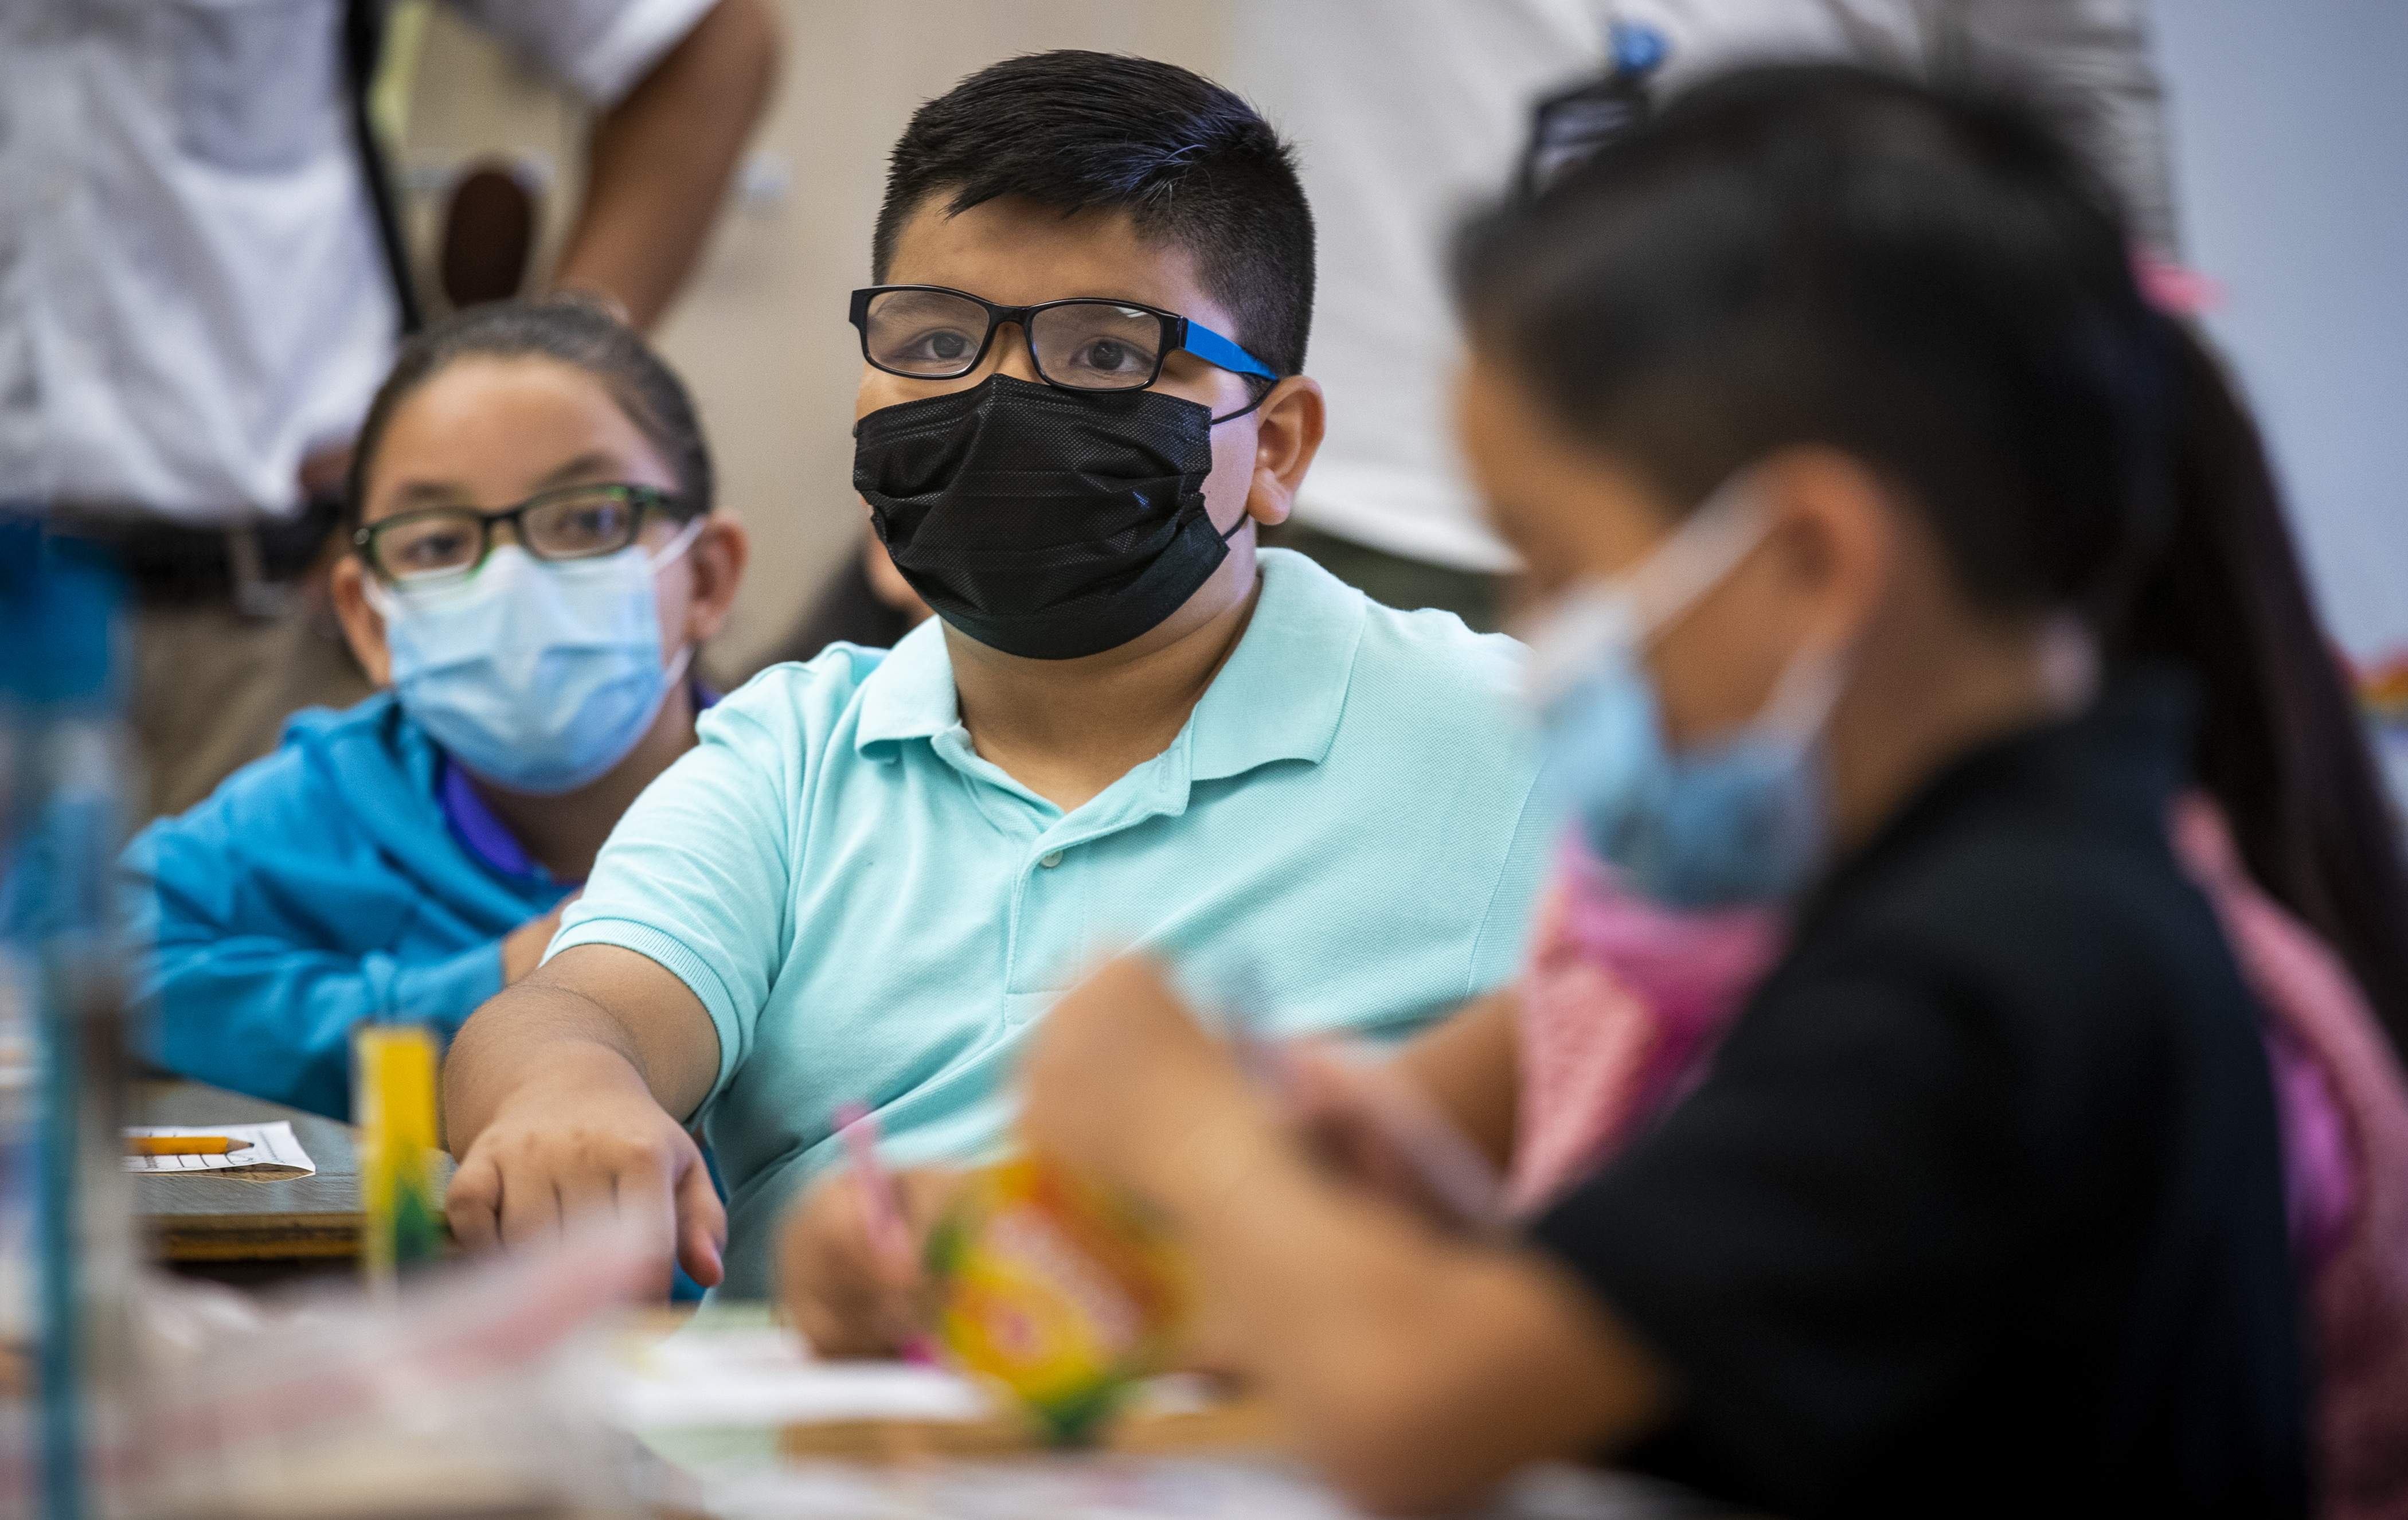 Children wearing masks sit at a classroom table.